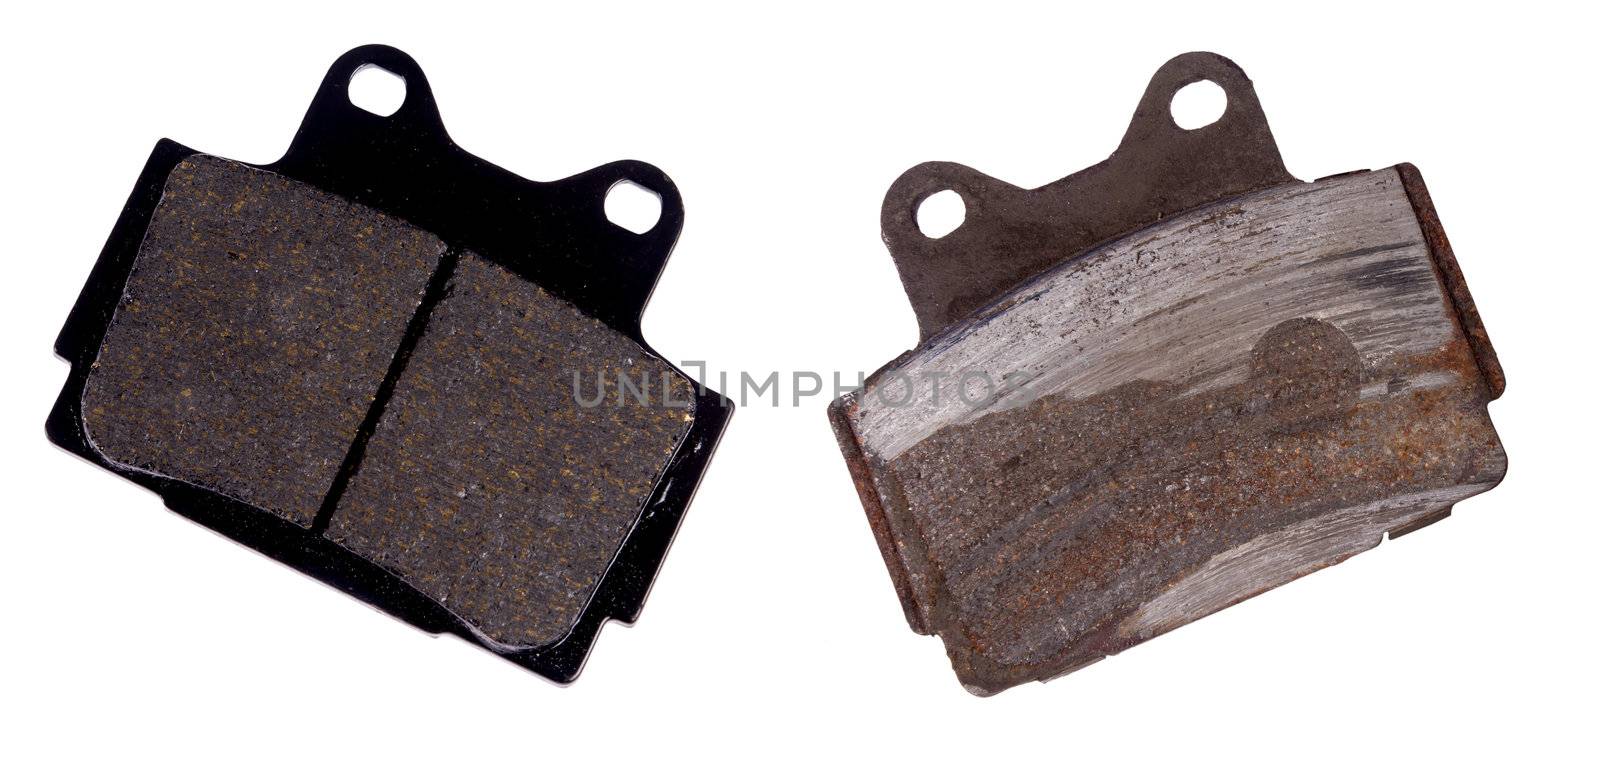 New and worn brake pad, isolated on background